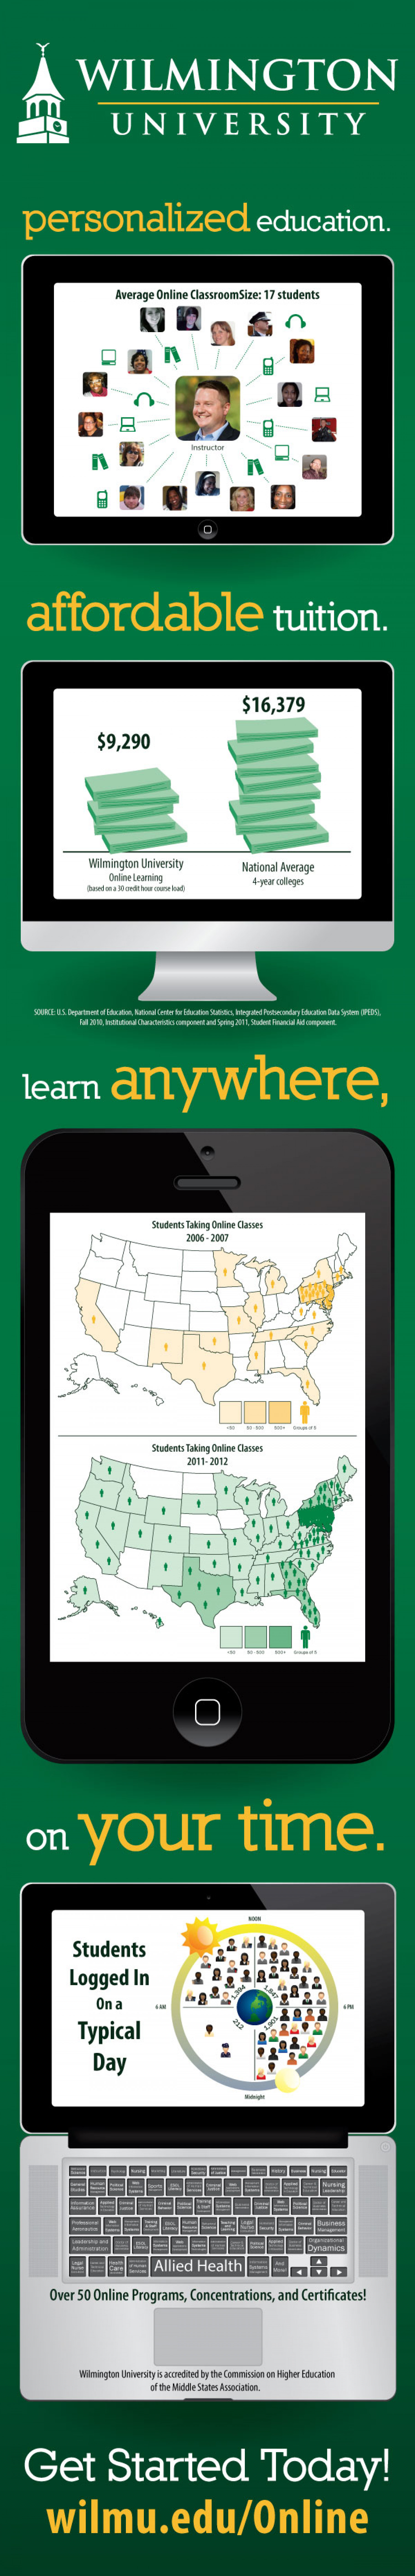 Wilmington University Online Degree Programs - Earn your degree in a way that fits your life Infographic